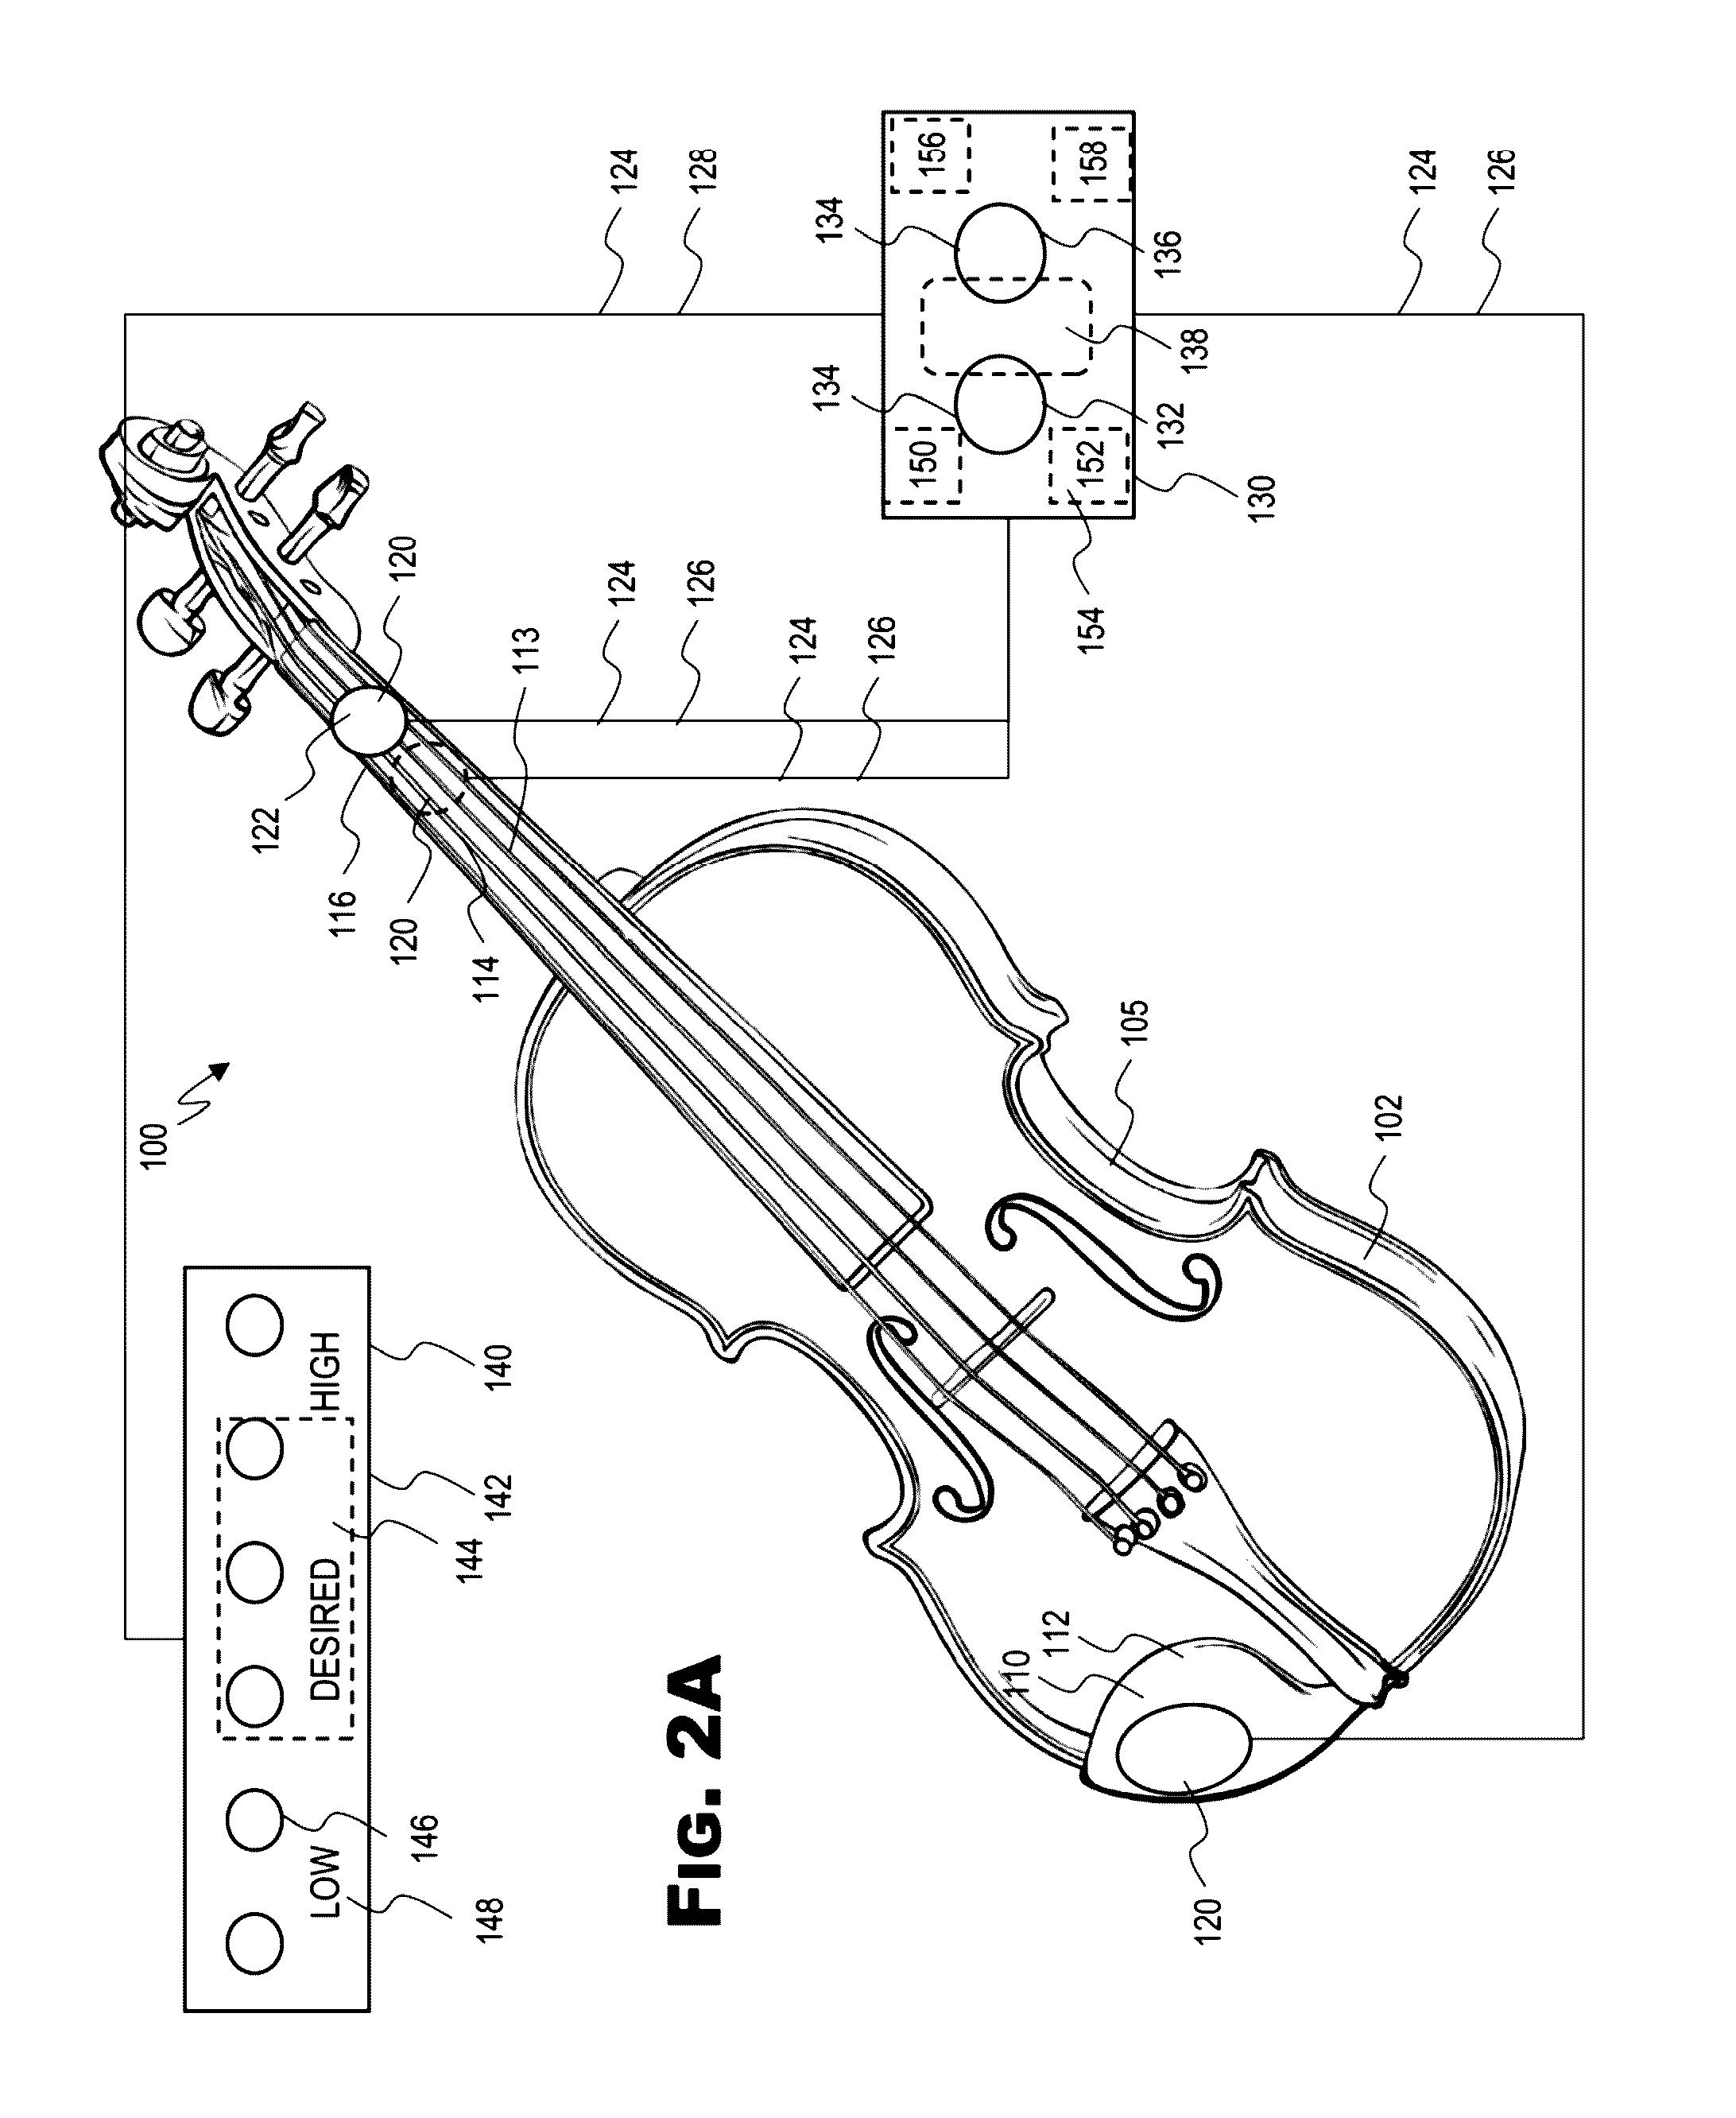 Stringed musical instrument performance feedback system and method